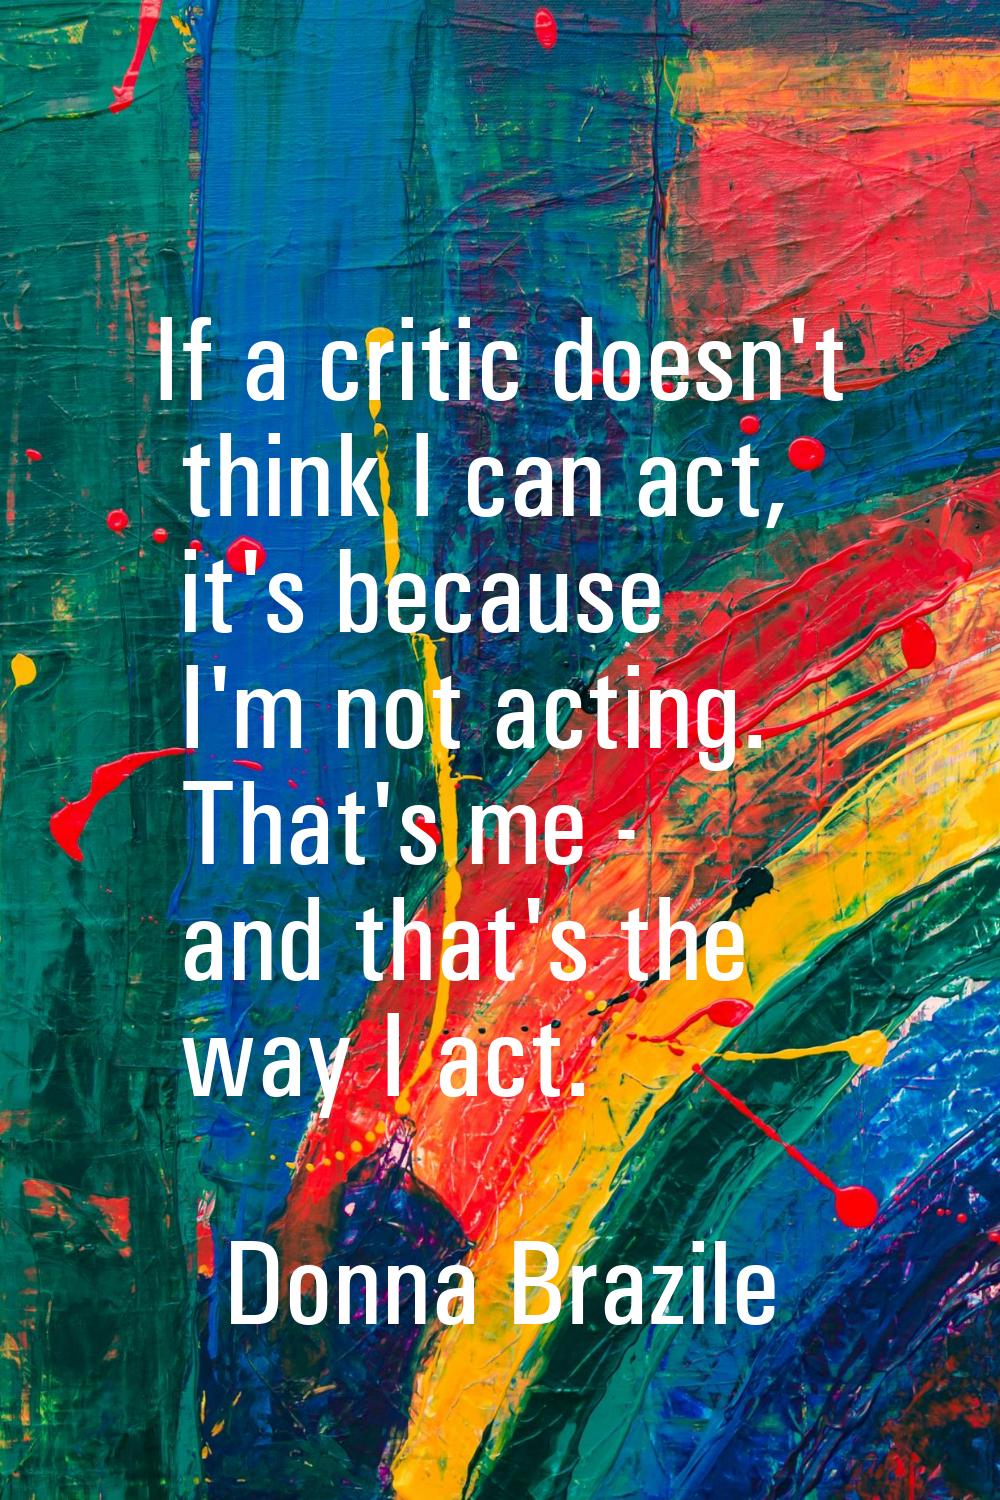 If a critic doesn't think I can act, it's because I'm not acting. That's me - and that's the way I 